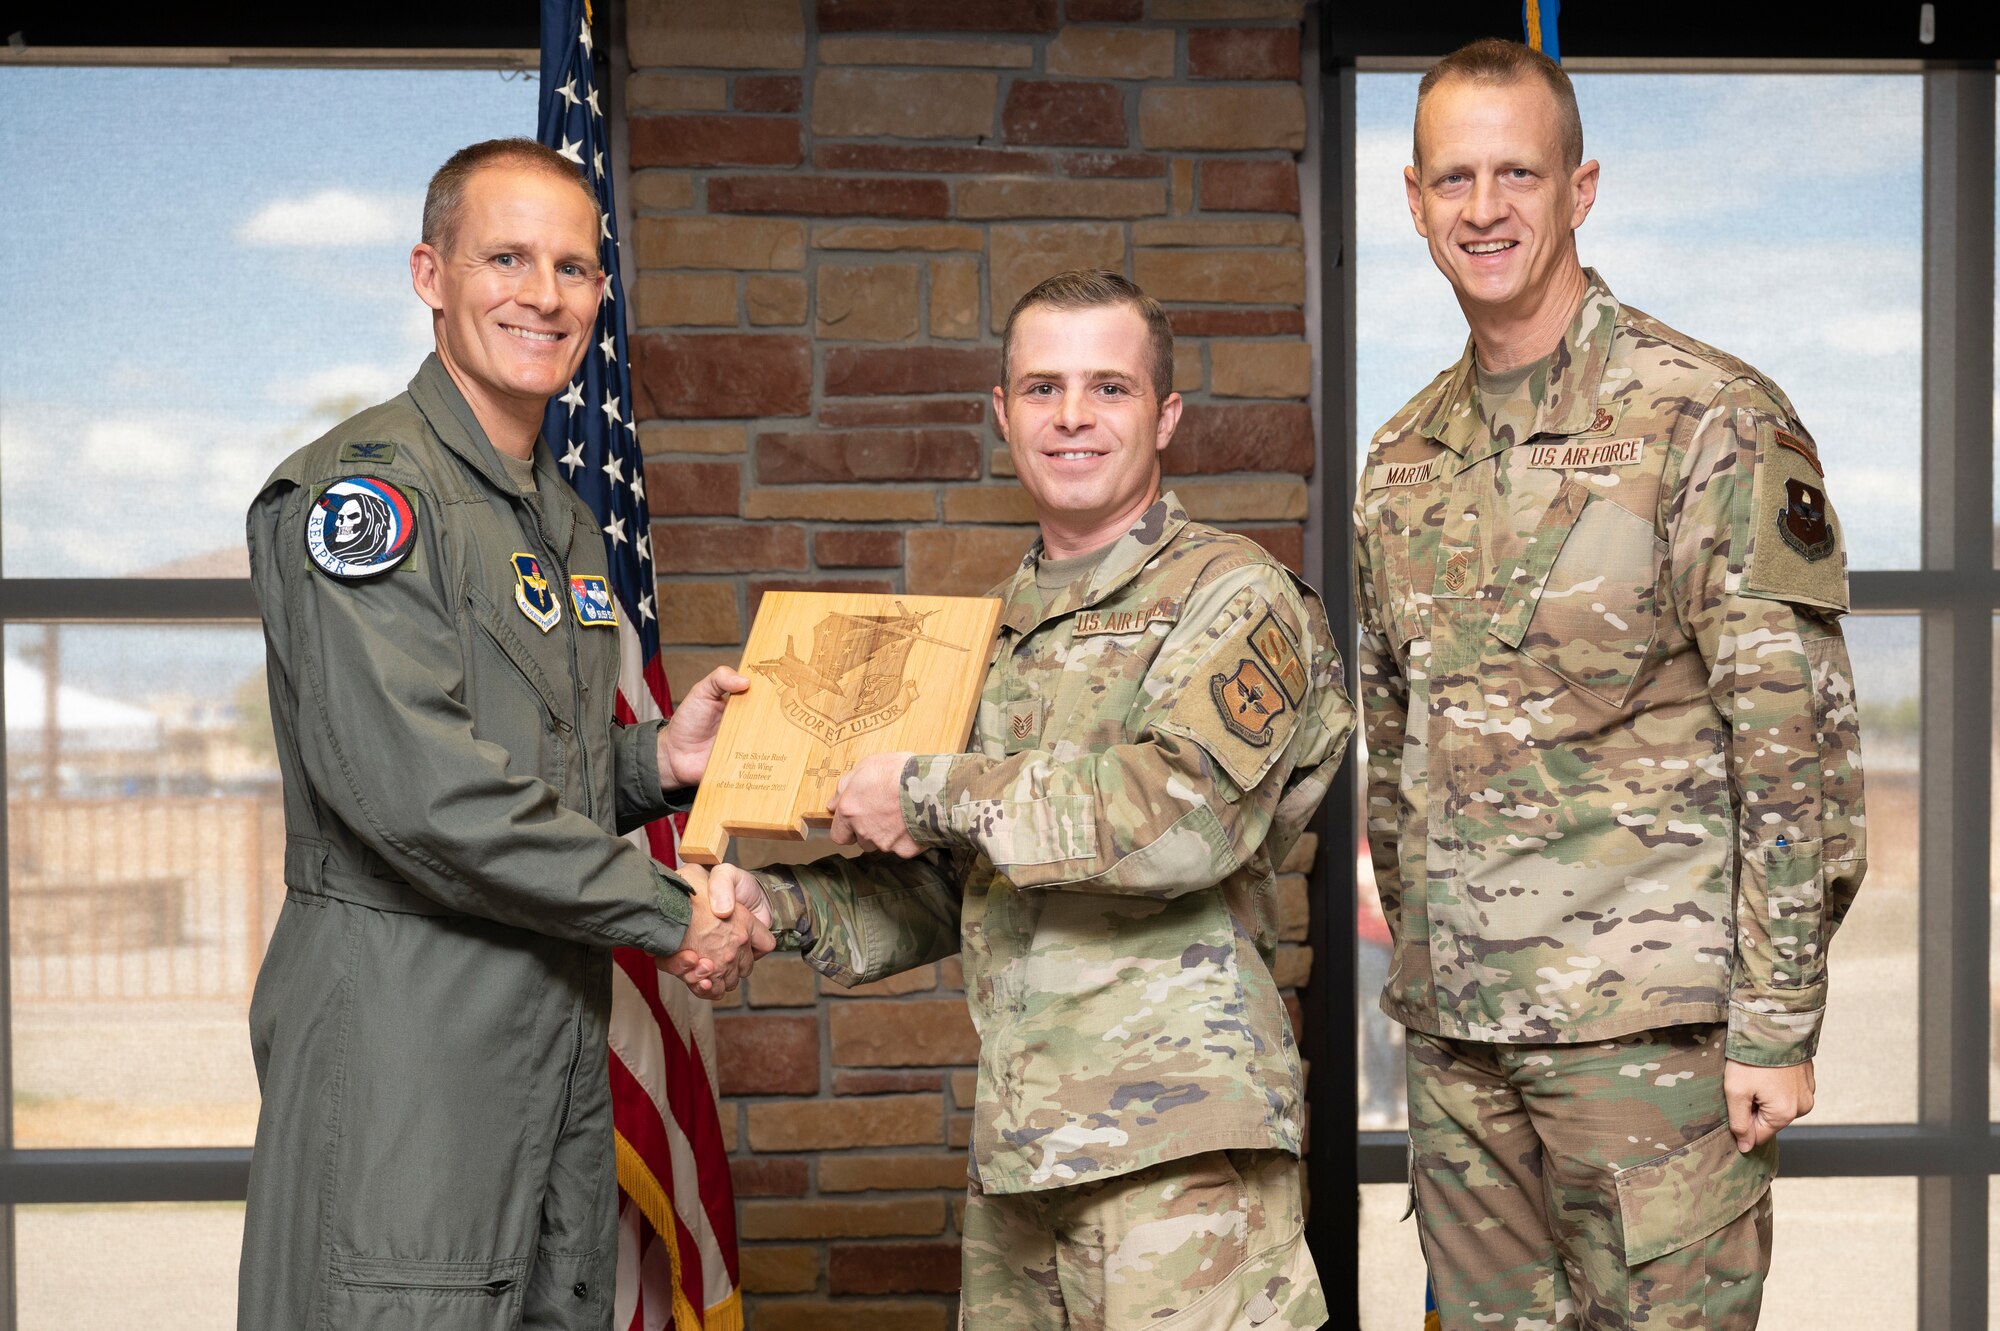 U.S. Air Force Tech. Sgt. Skylar Rudy, from the 49th Security Forces Squadron, accepts the 49th Wing’s Volunteer of the Second Quarter Award, during the 49th Wing’s 2nd Quarter Award ceremony at Holloman Air Force Base, New Mexico, Aug. 11, 2023. Quarterly award winners were selected based on their technical expertise, demonstration of leadership and job performance. (U.S. Air Force photo by Airman 1st Class Michelle Ferrari)